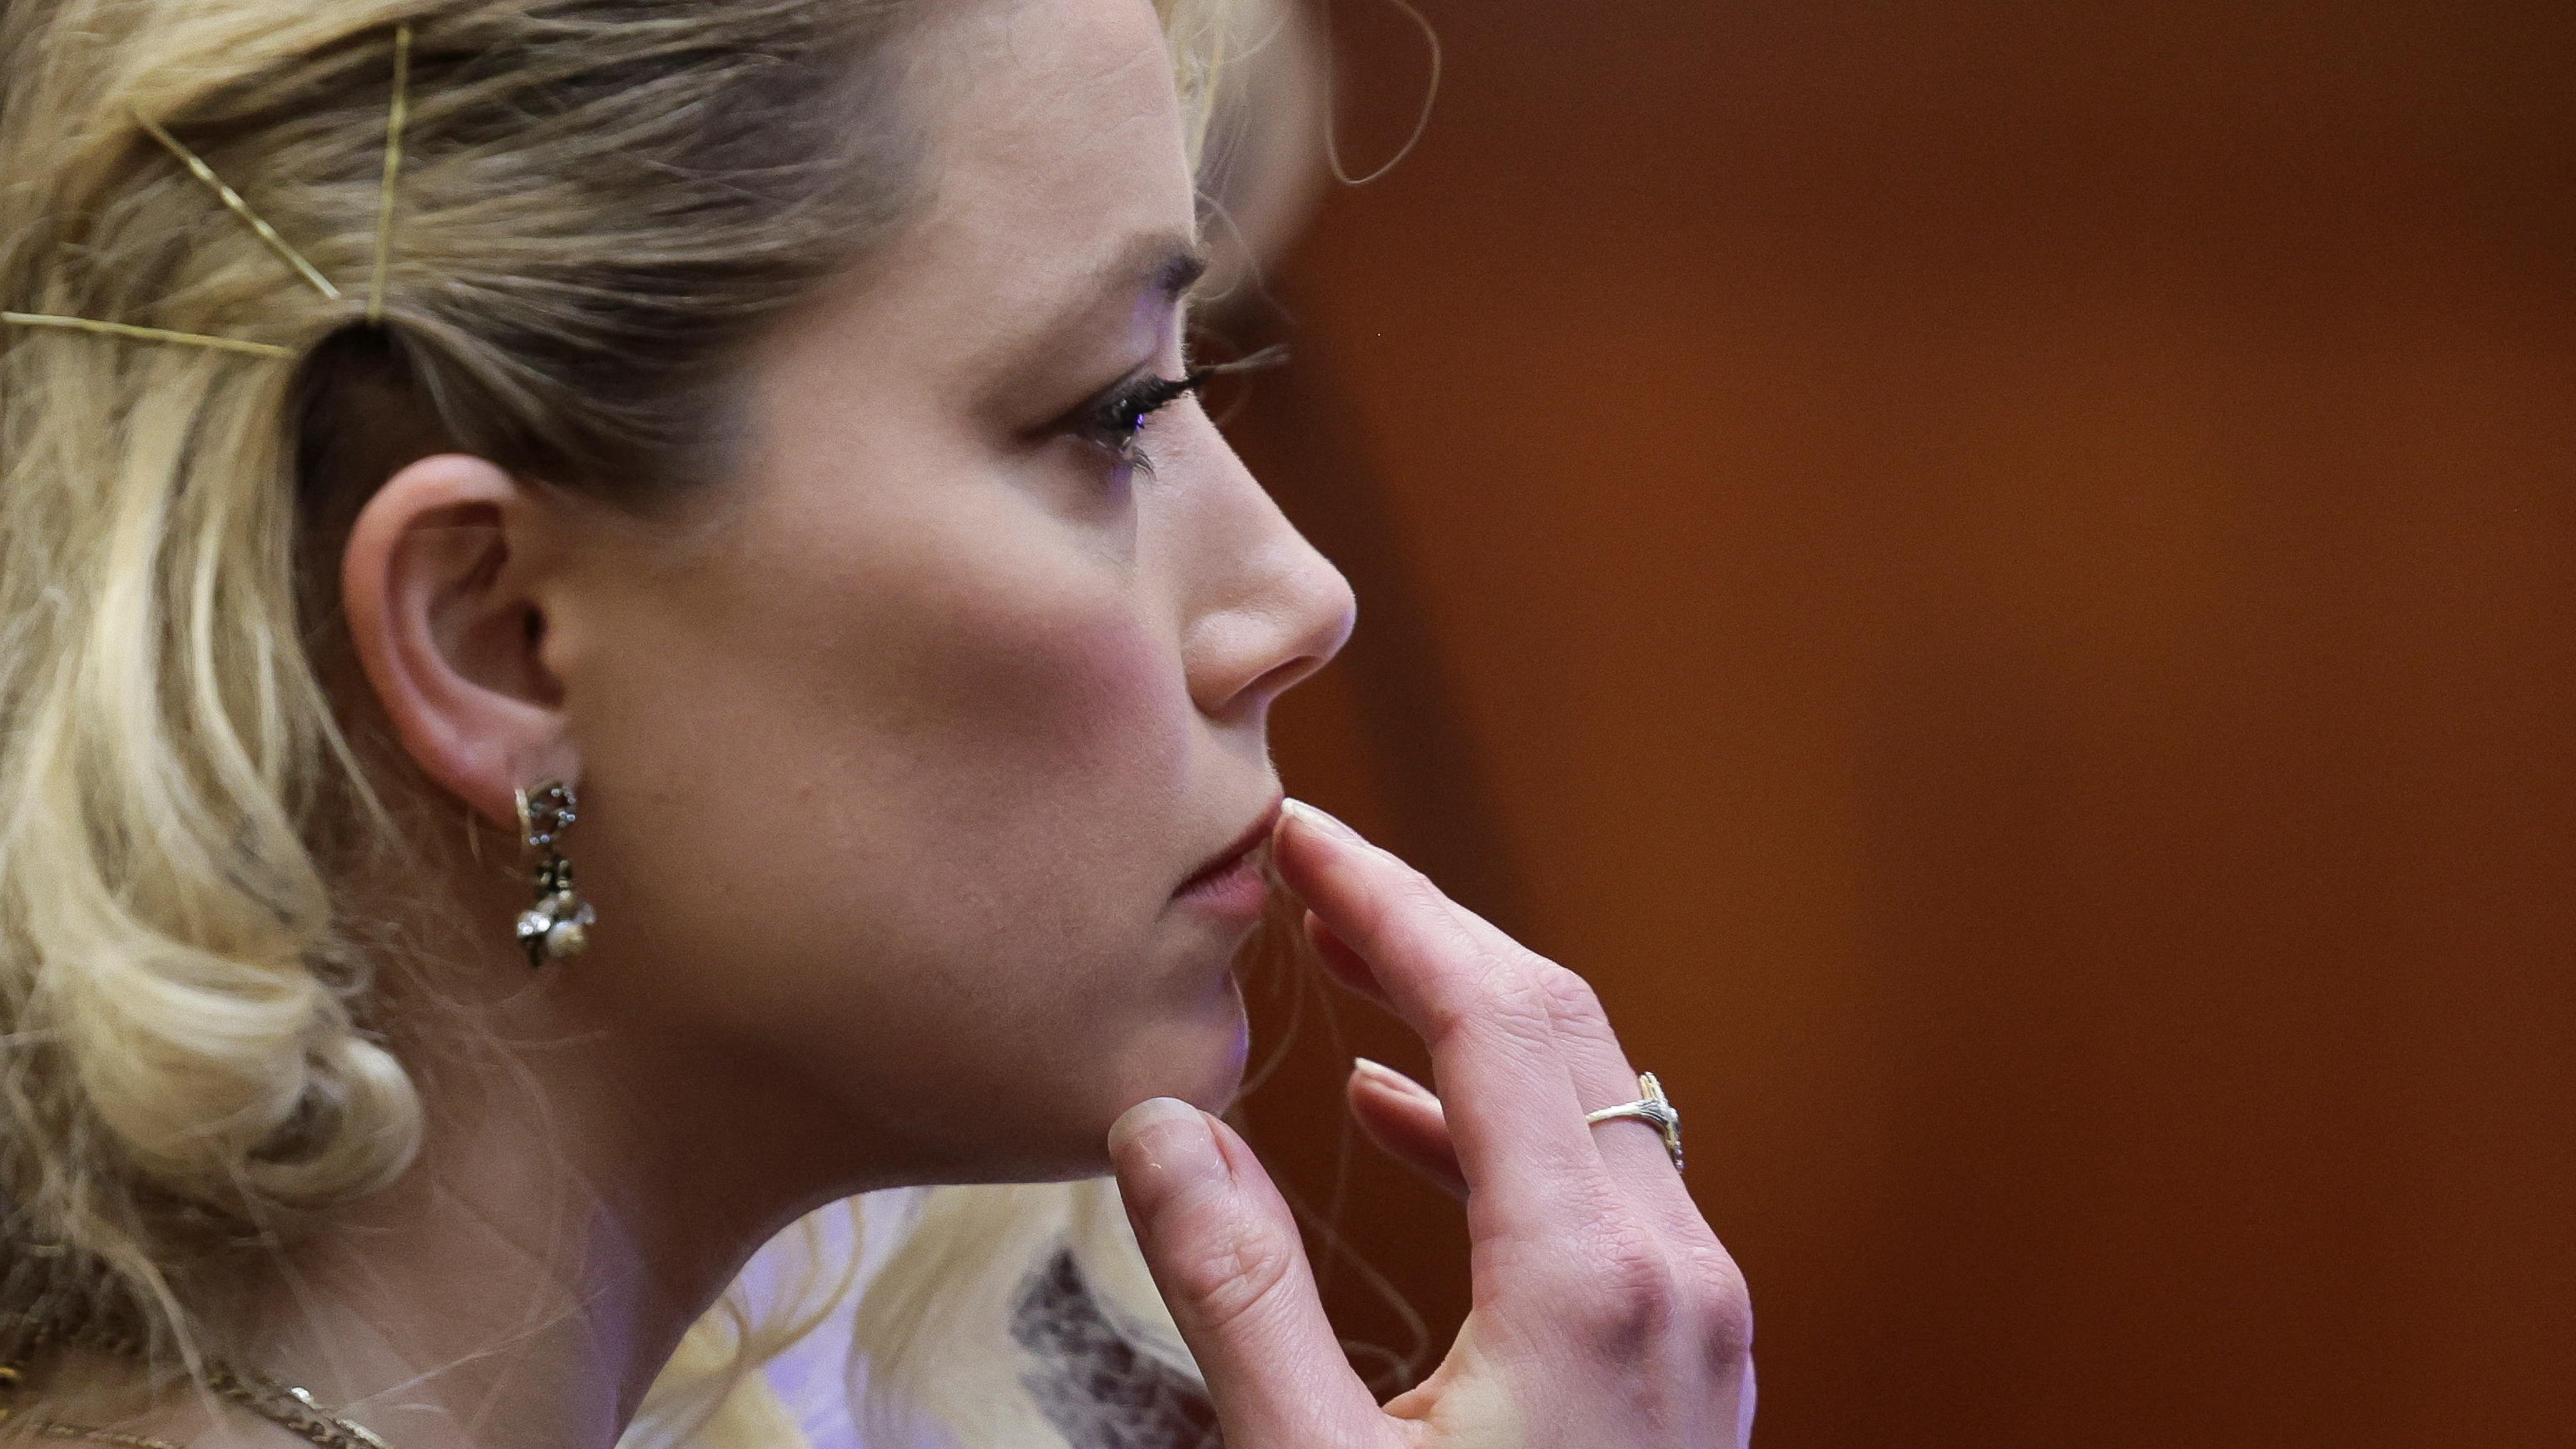 Actor Amber Heard waits before the jury said that they believe she defamed ex-husband Johnny Depp while announcing split verdicts in favor of both her ex-husband Johnny Depp and Heard on their claim and counter-claim in the Depp v. Heard civil defama